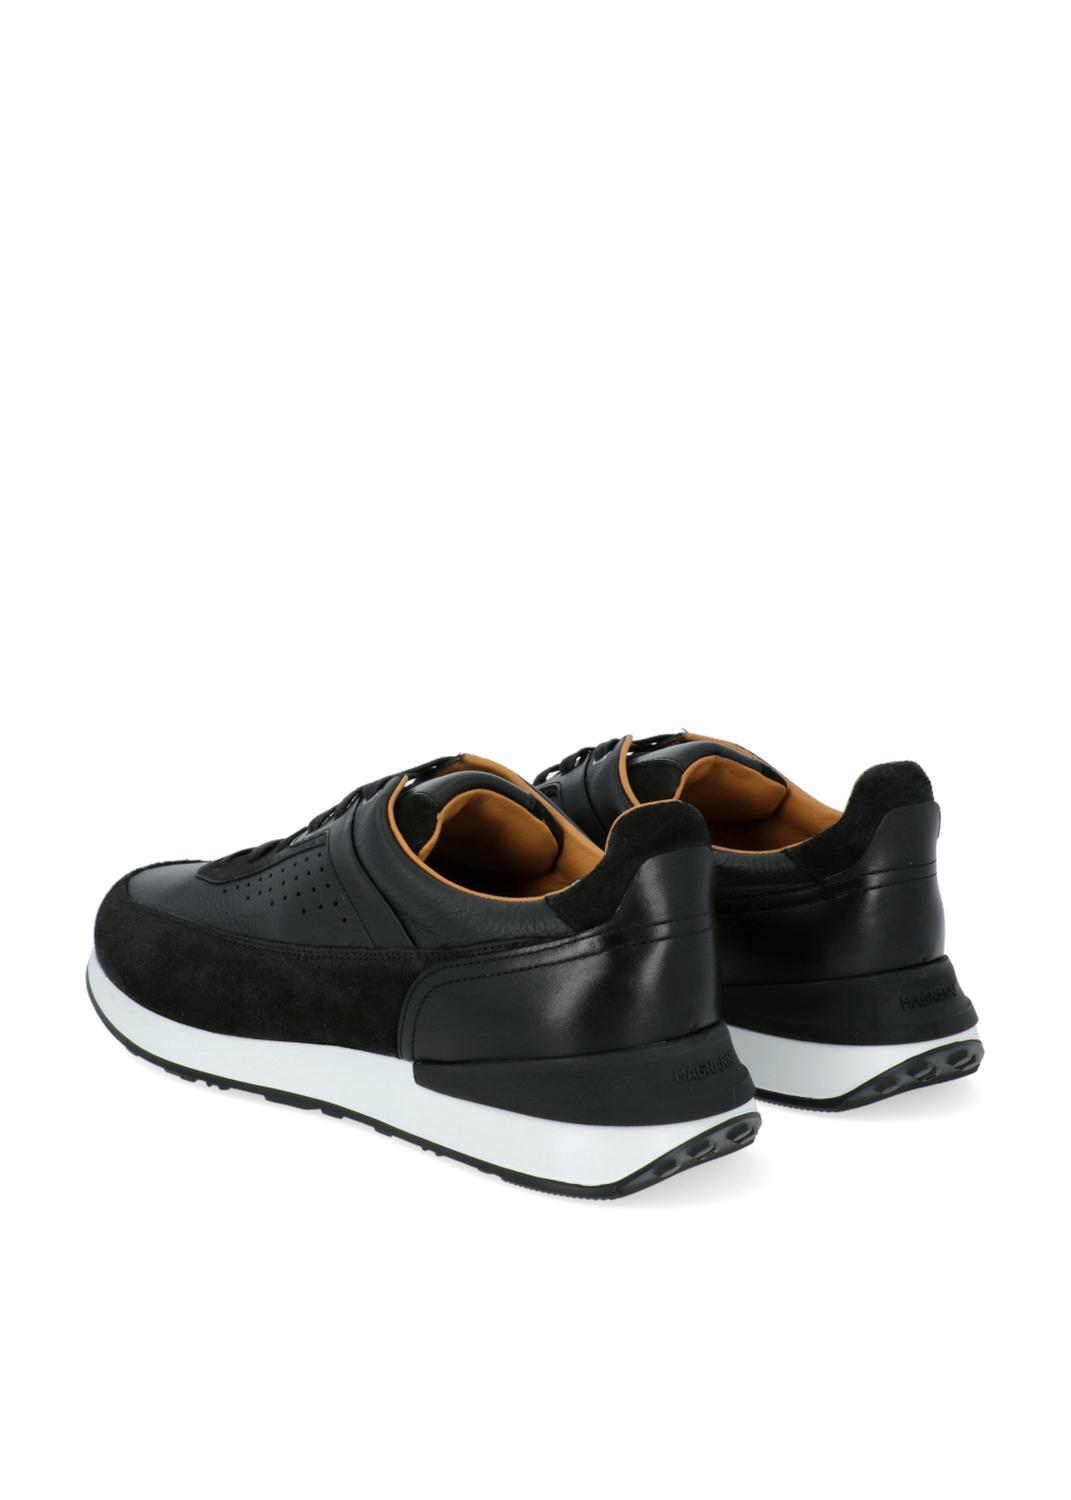 Magnanni Sneakers MGN-25353